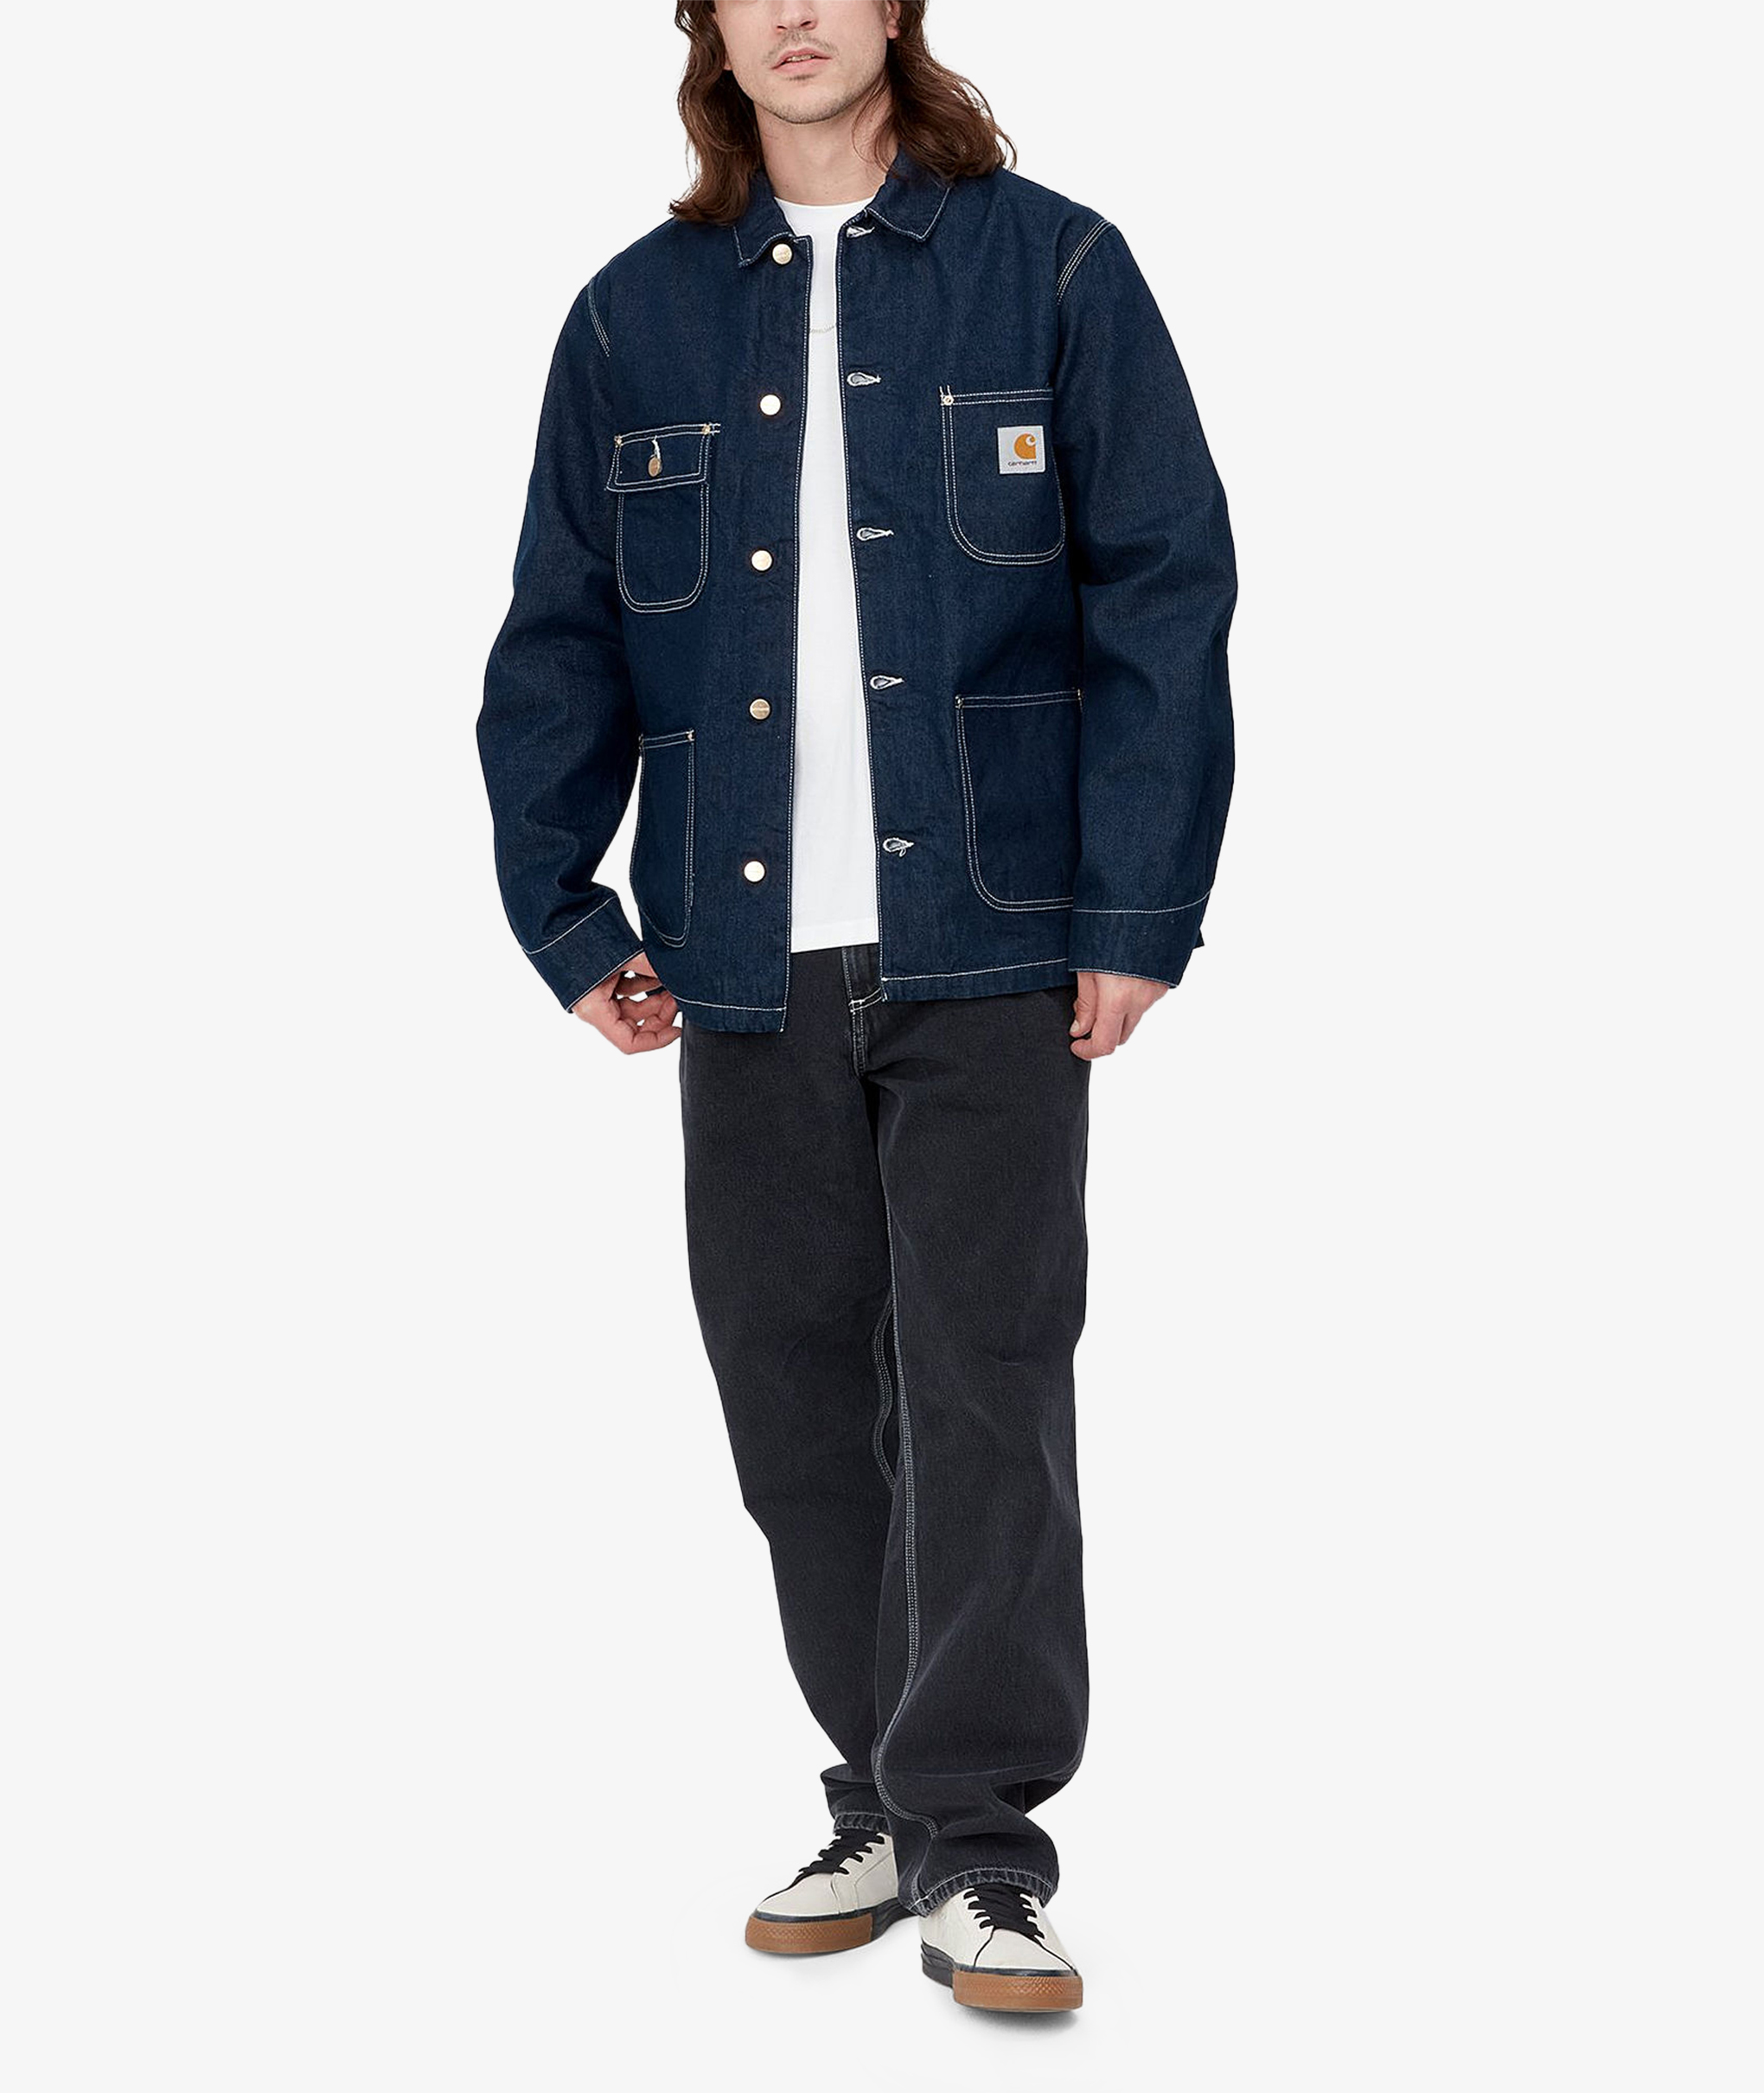 Norse Store  Shipping Worldwide - Carhartt WIP OG Active Jacket